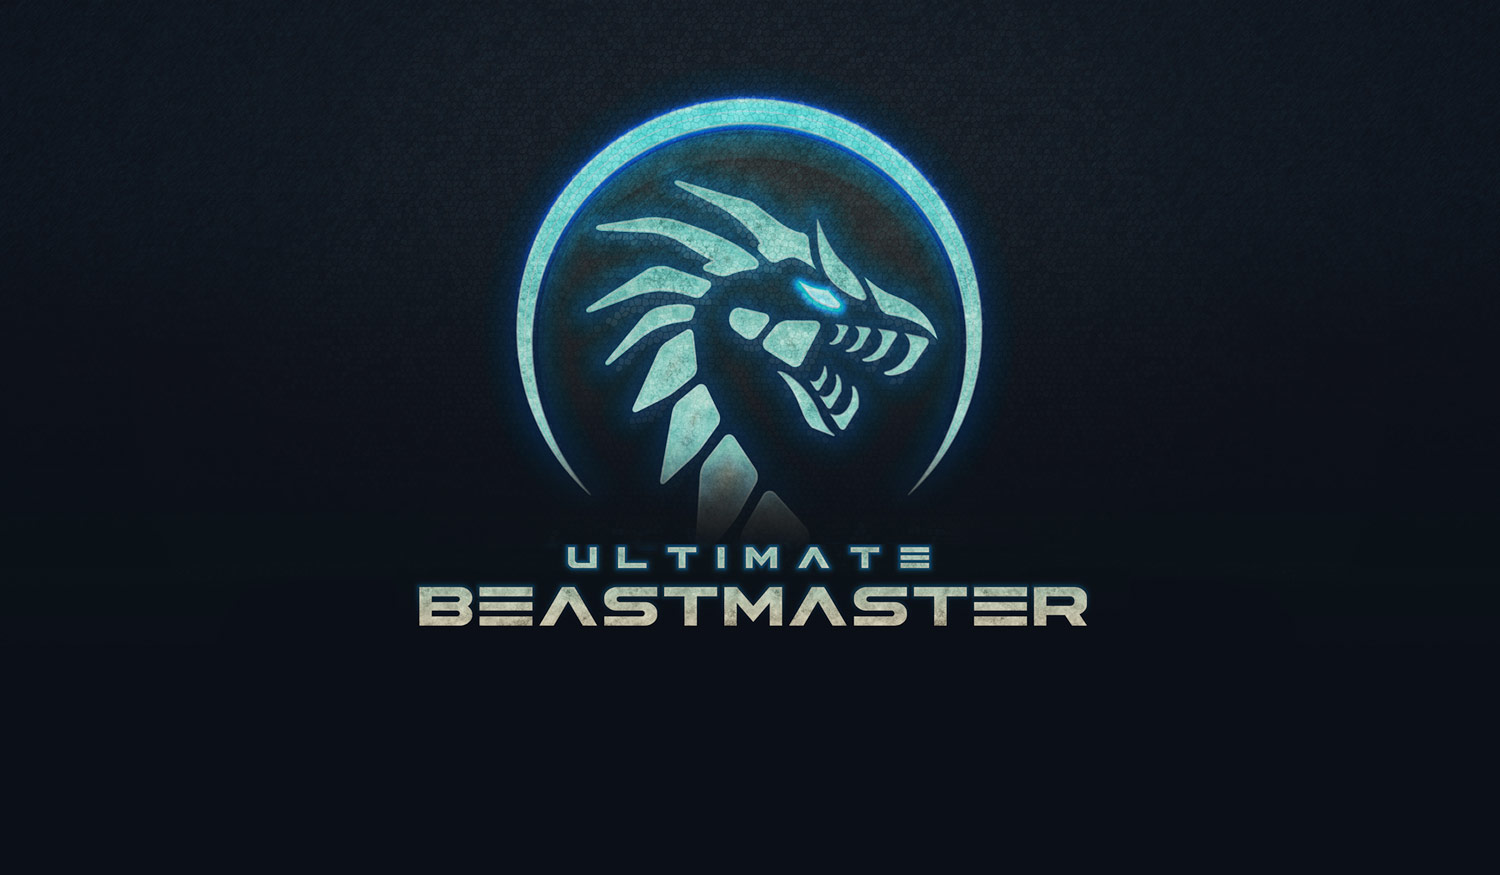 The Ultimate Beastmaster